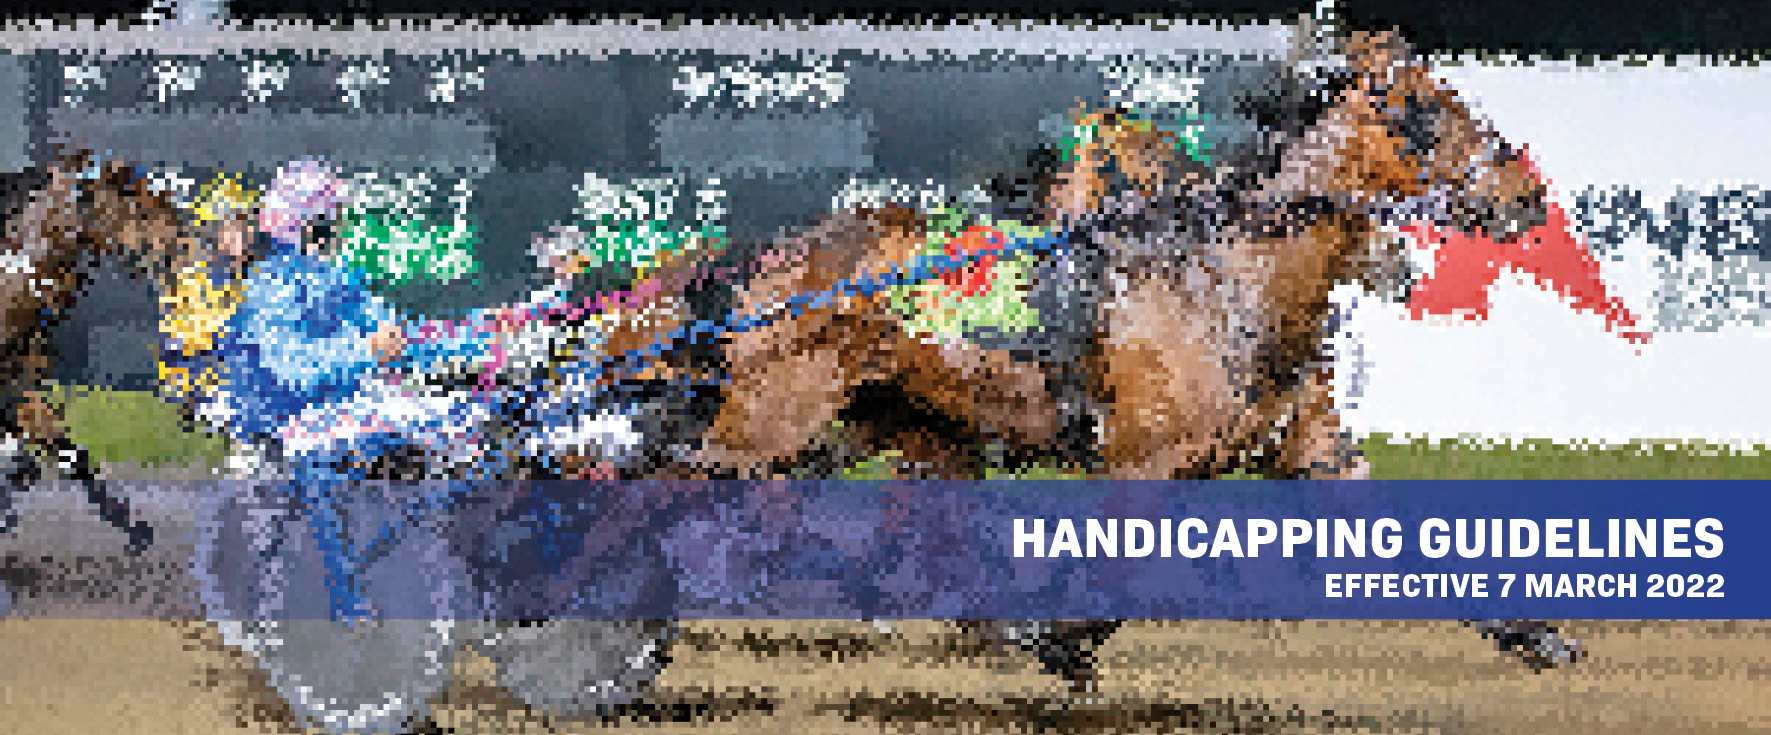 2022 Handicapping Guidelines